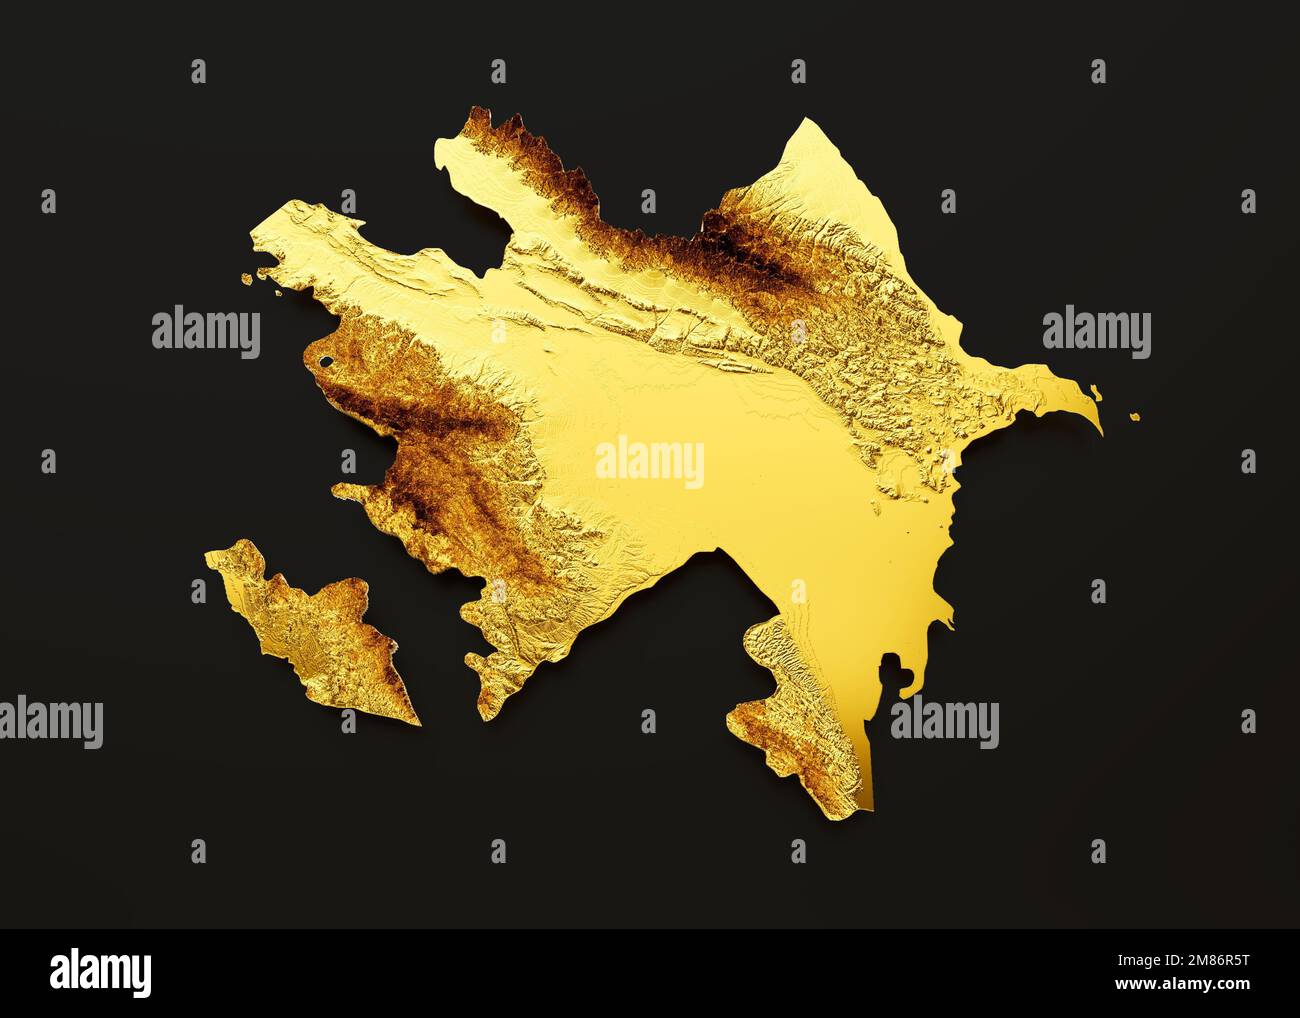 A 3D illustration of the map of Azerbaijan in a retro style with golden graphics on a black background Stock Photo